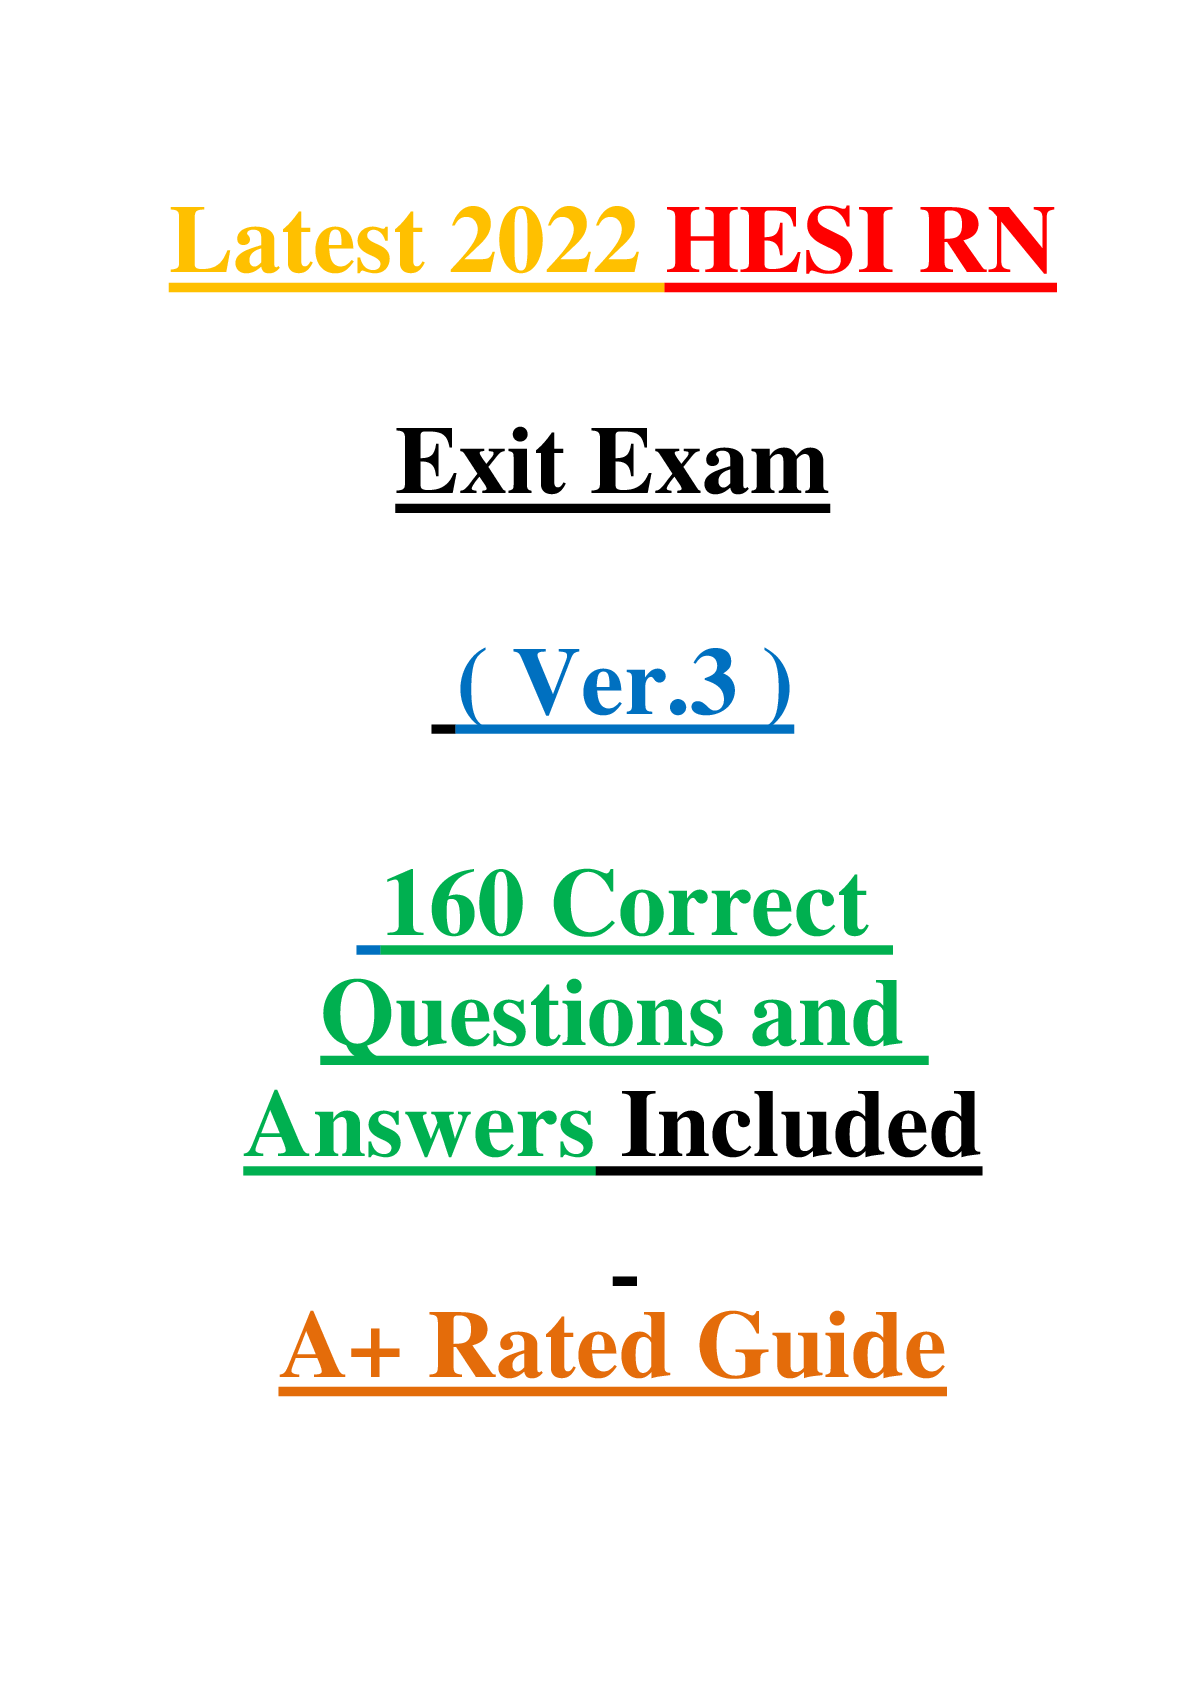 Latest 2022 HESI RN Exit Exam ( Ver.3 ) 160 Correct Questions and